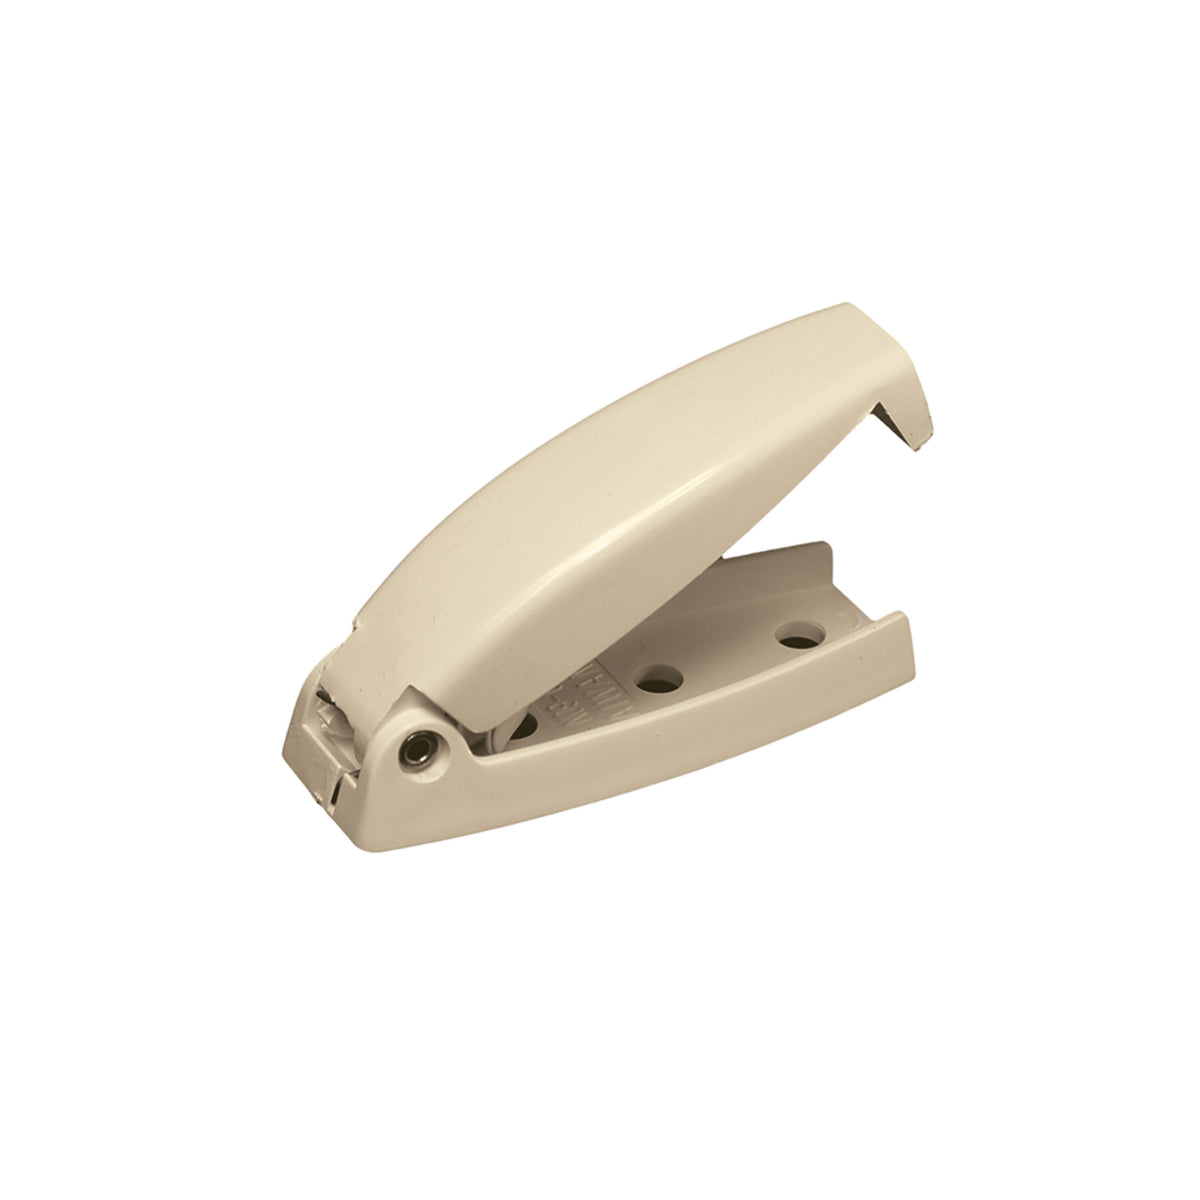 RV Designer E209 Rounded Baggage Door Catch - Colonial White, Set of 2